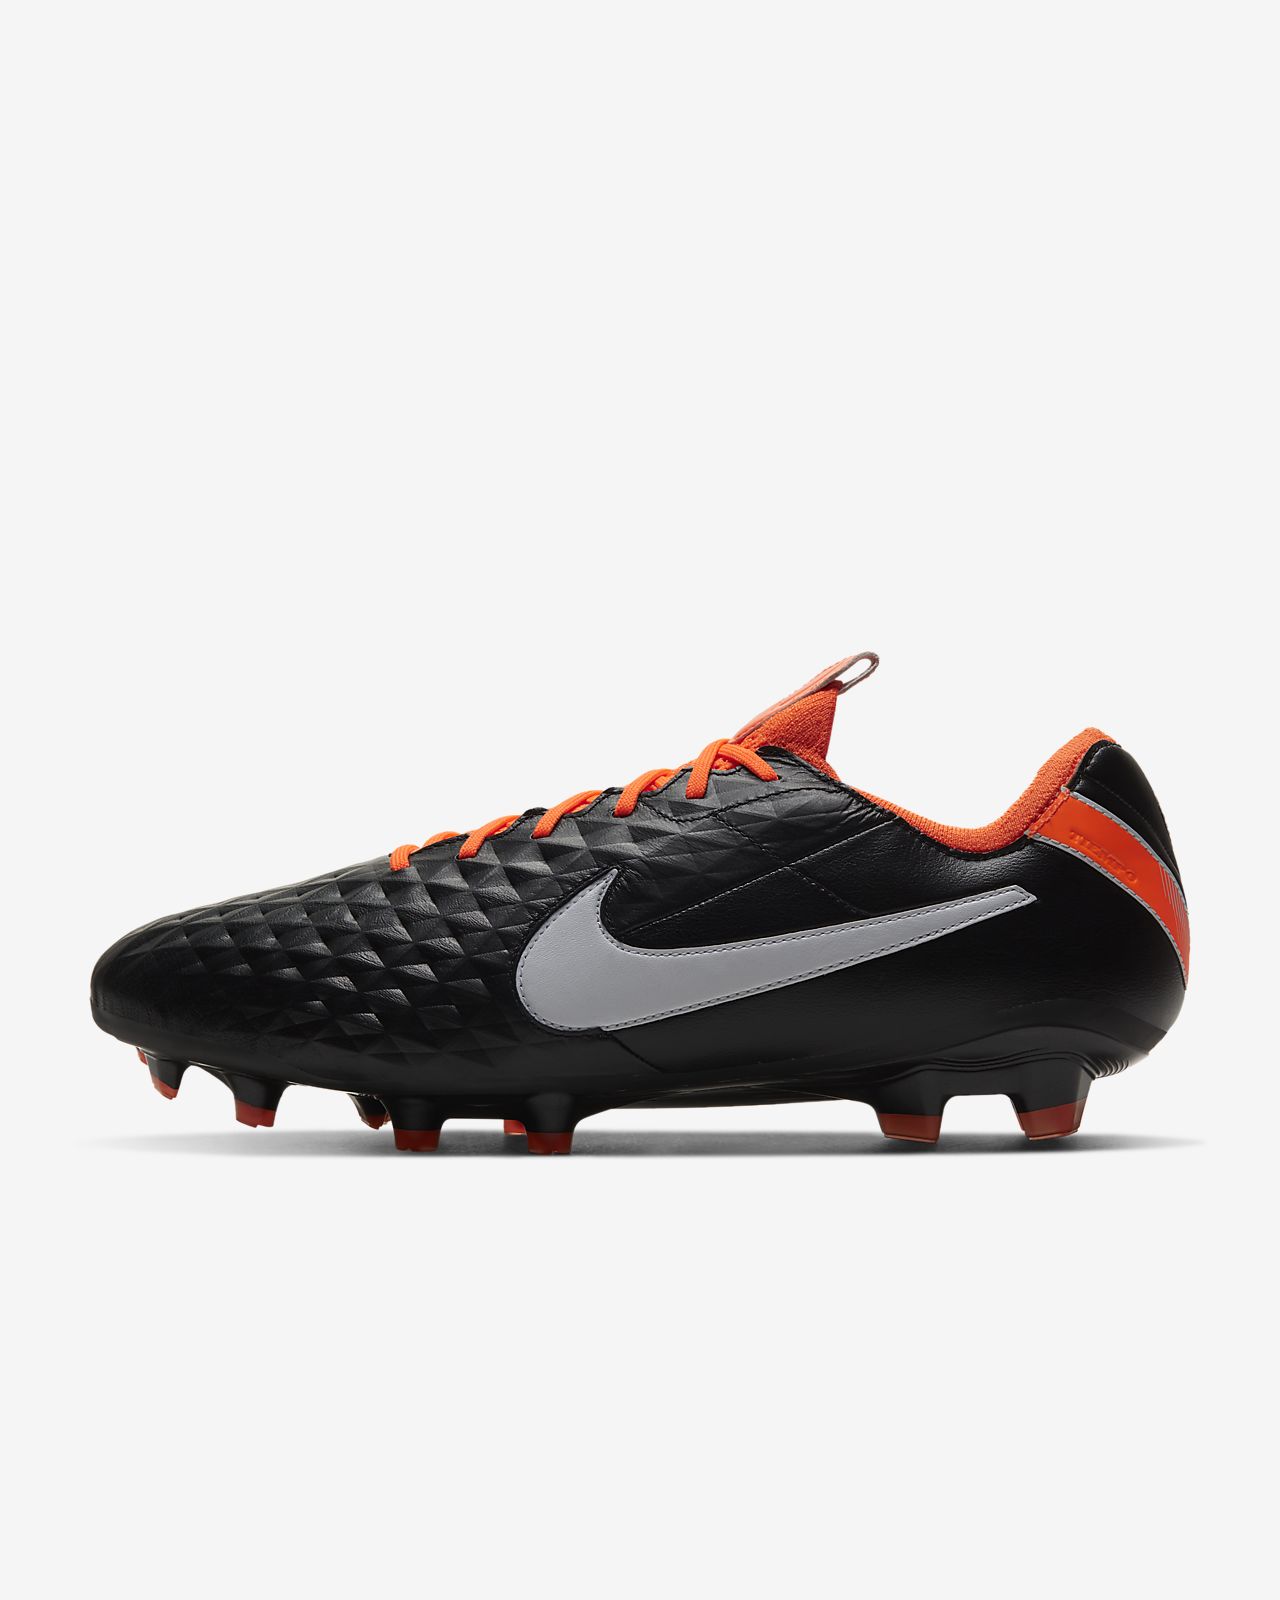 Nike Tiempo Legend 8 Academy MG Soccer Cleats.